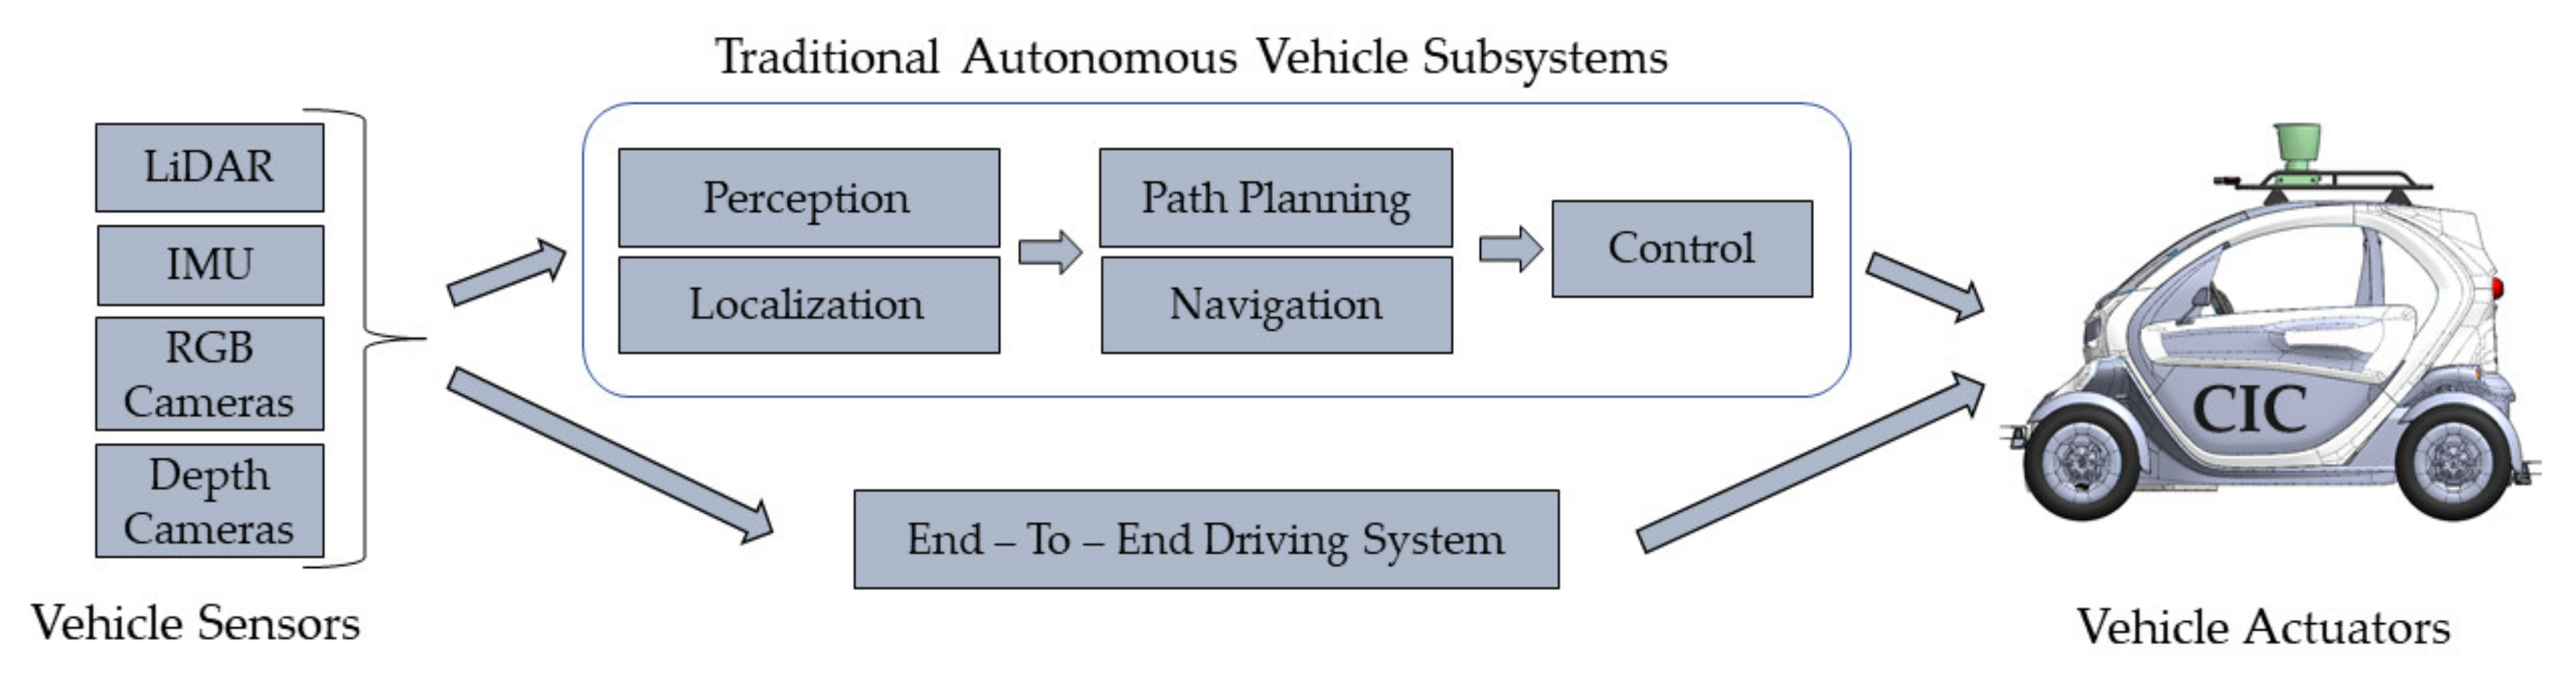 Deep Learning driving simulator  how to tackle the third Udacity Self- Driving Car engineer project